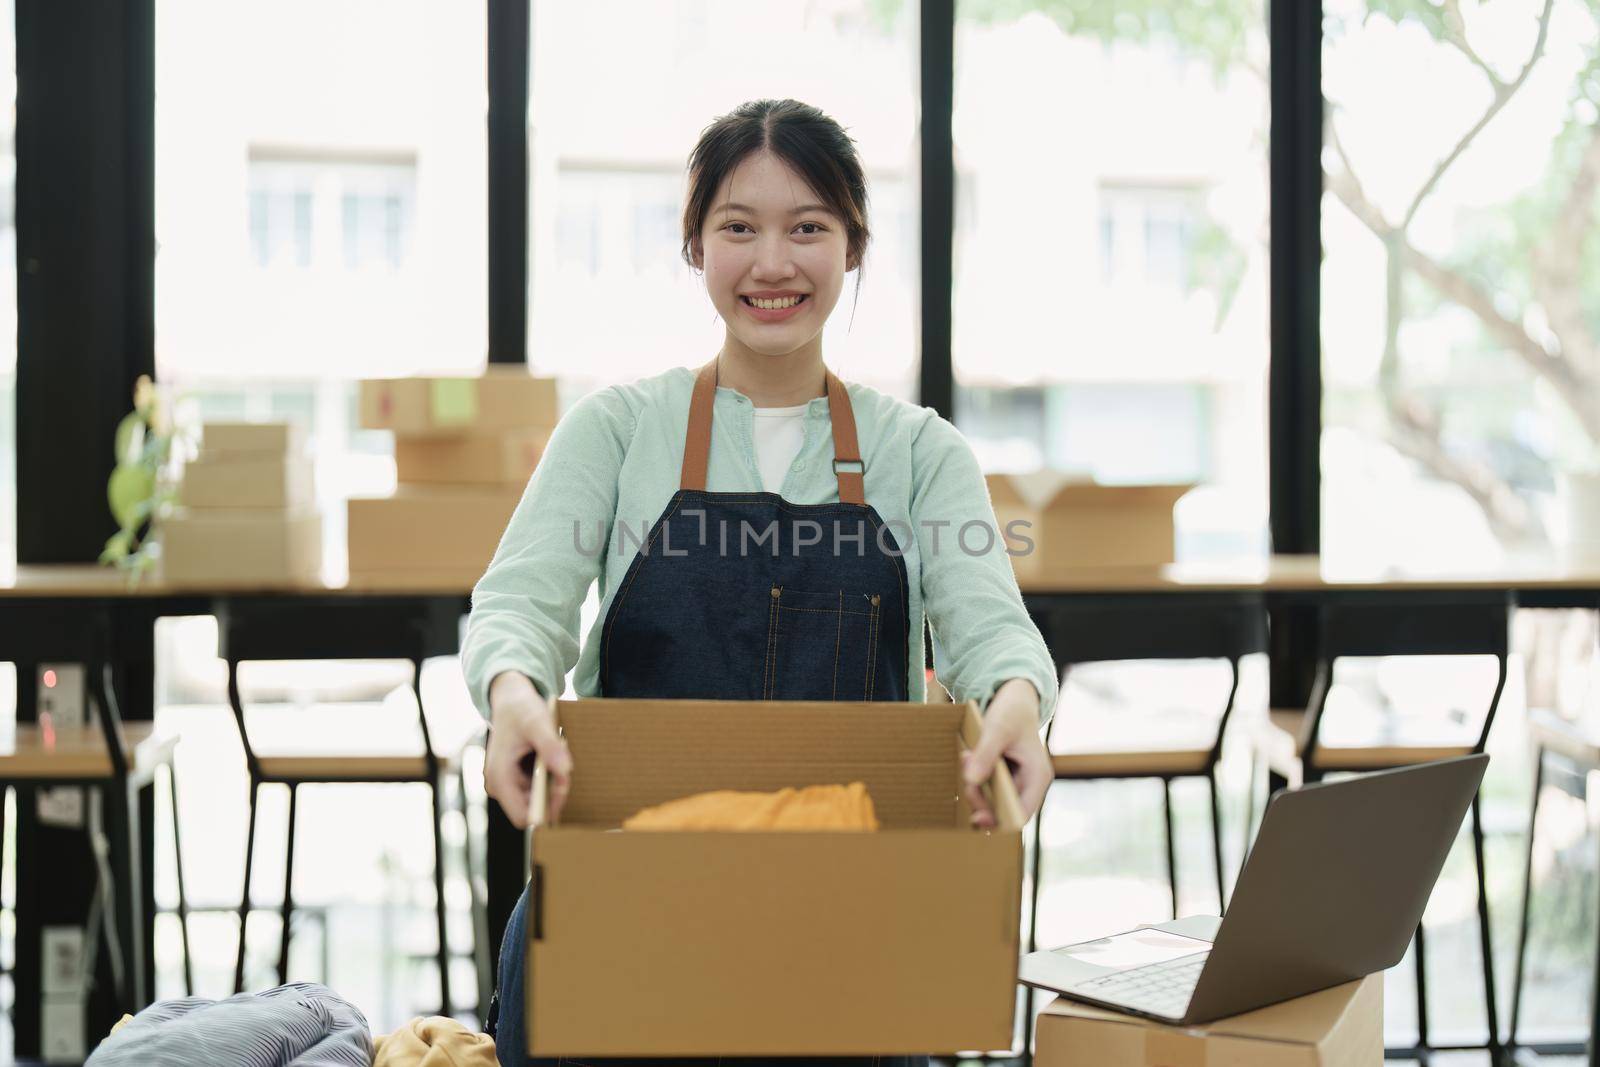 Portrait of a small startup Asian female entrepreneur SME owner picking up a yellow shirt before packing it in an inner box with a customer. Online Business Ideas and Freelance.